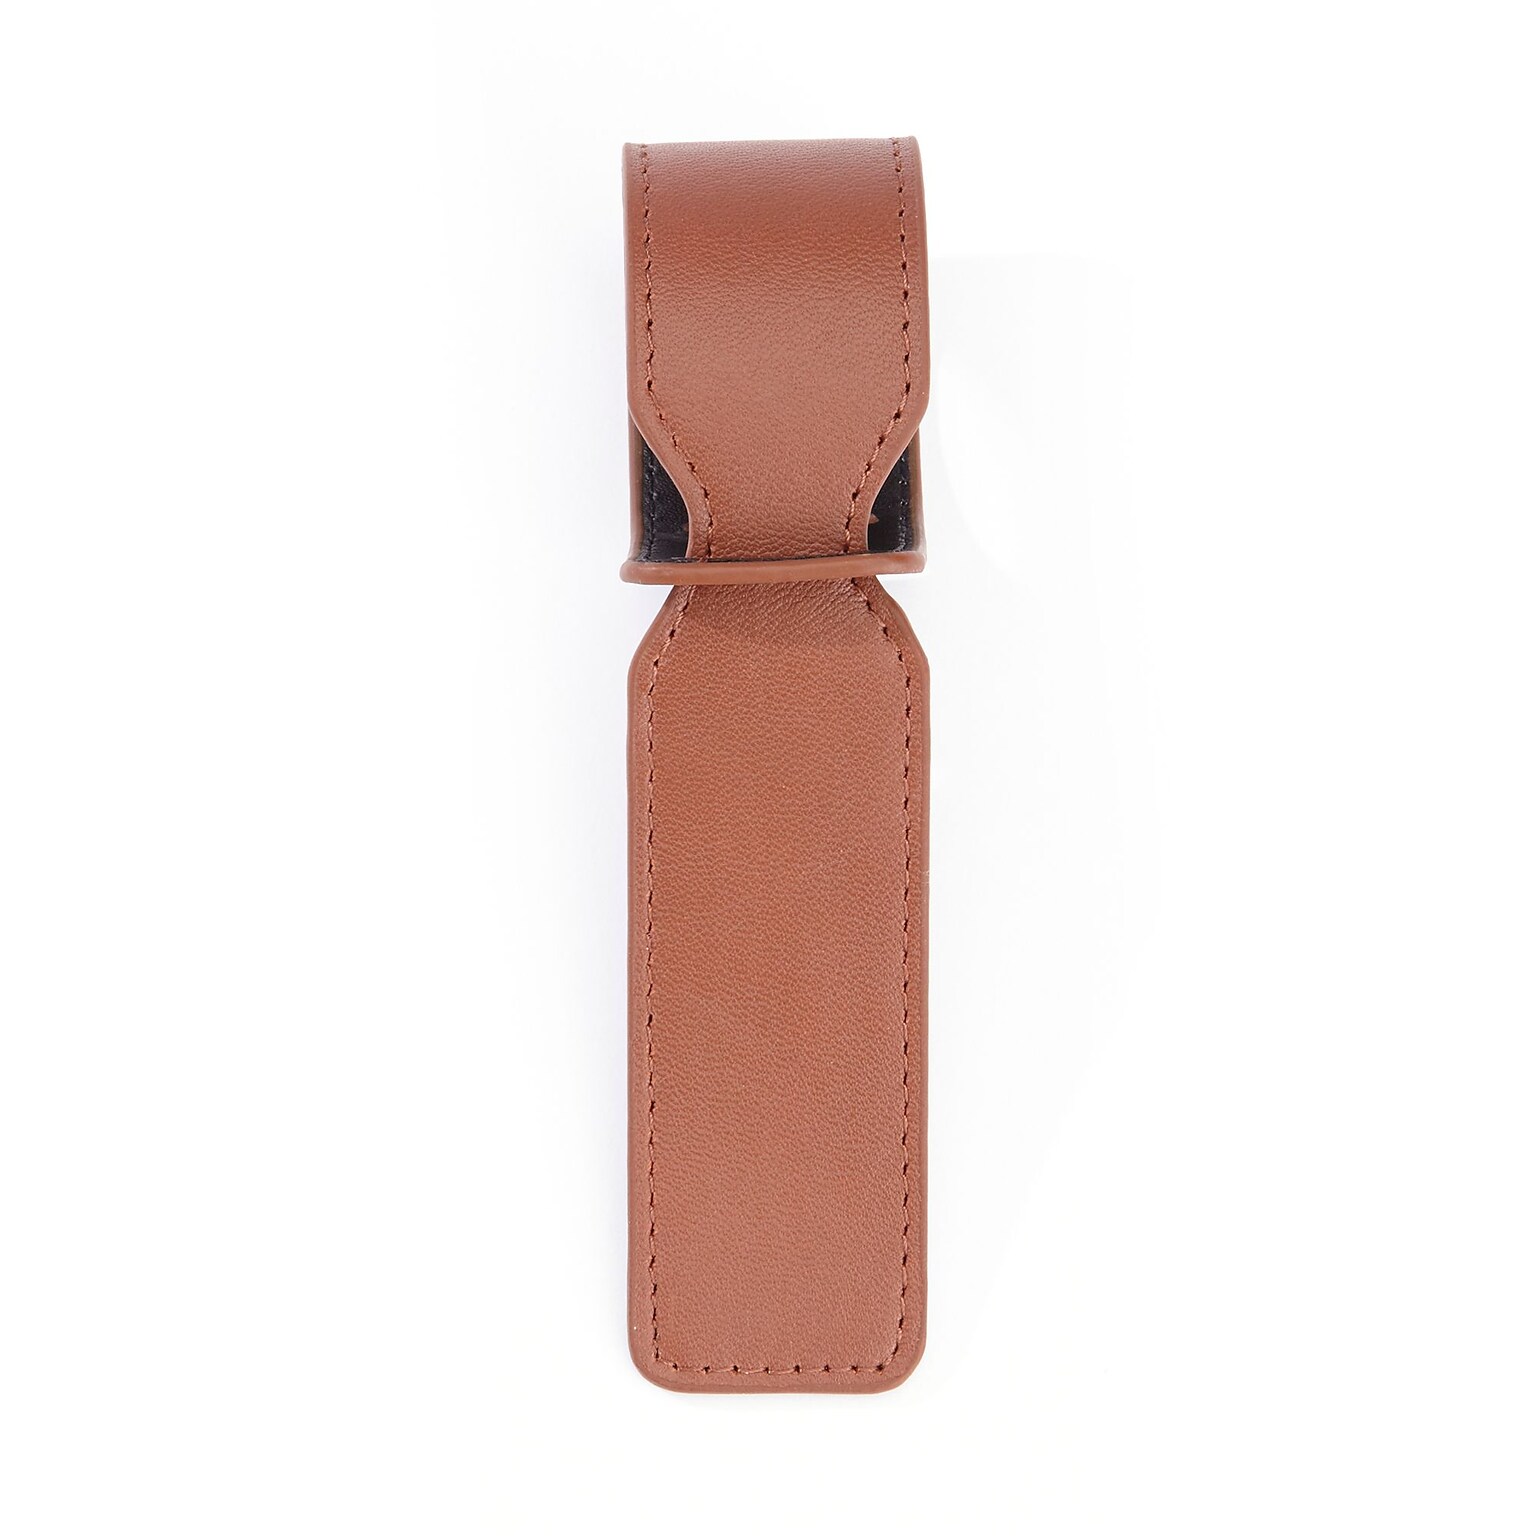 Royce Leather Luxury Bag Handle Tag for Identifying Luggage(954-tan-5)